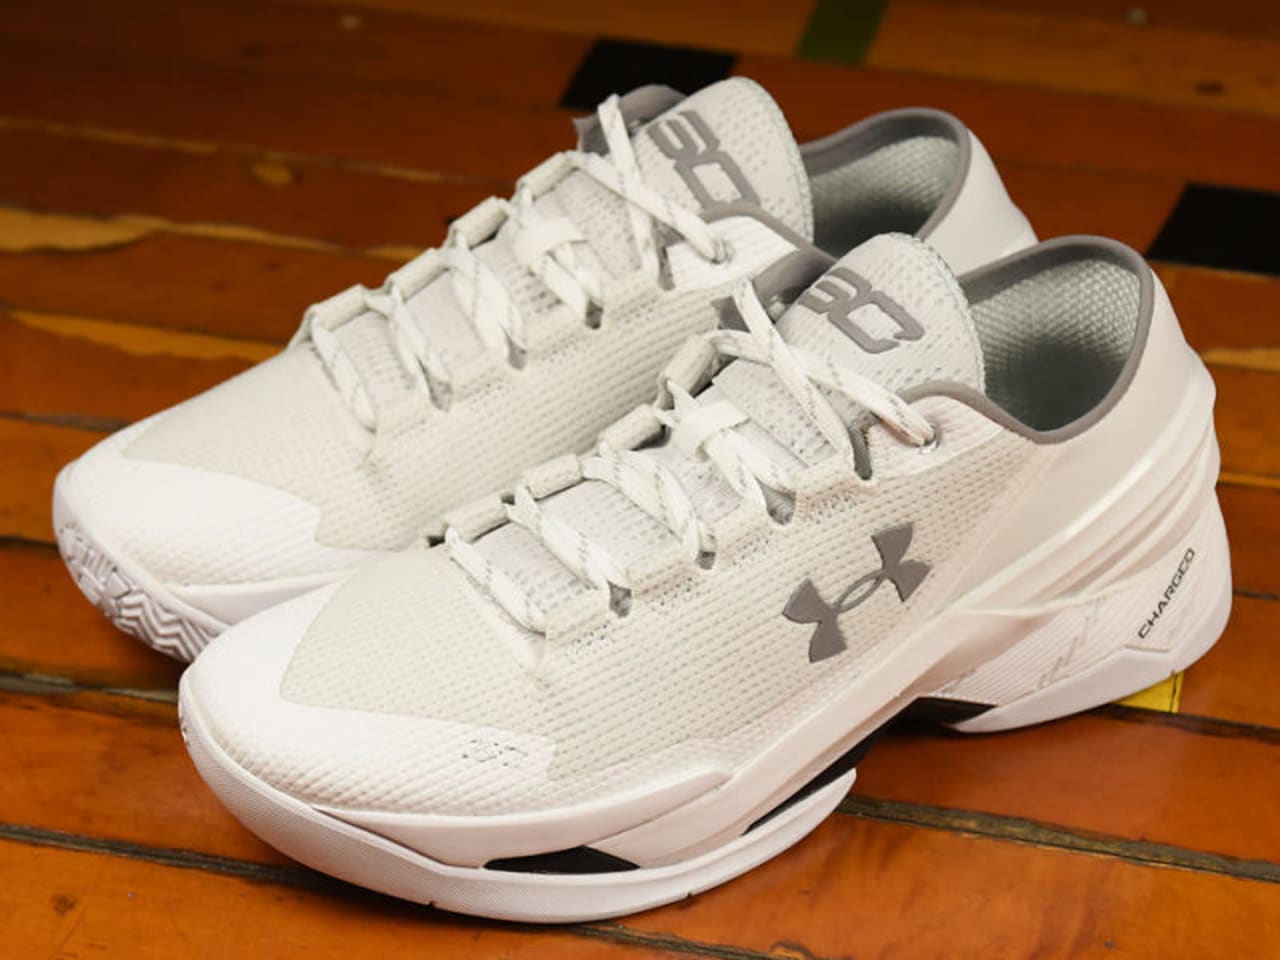 Steph Curry's White Sneakers 